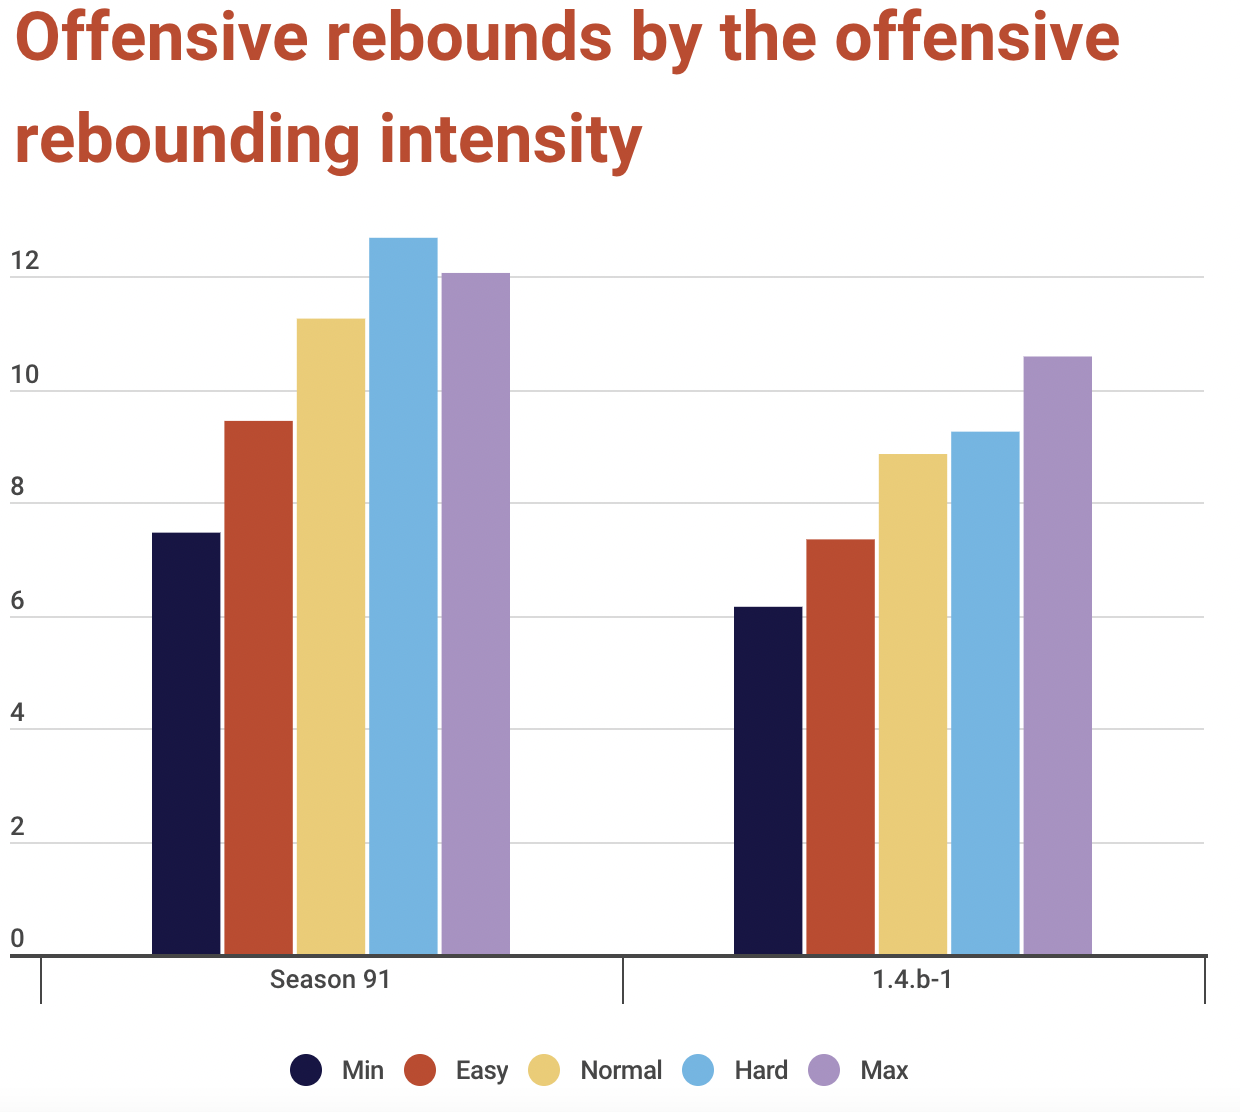 Offensive rebounds by intensity